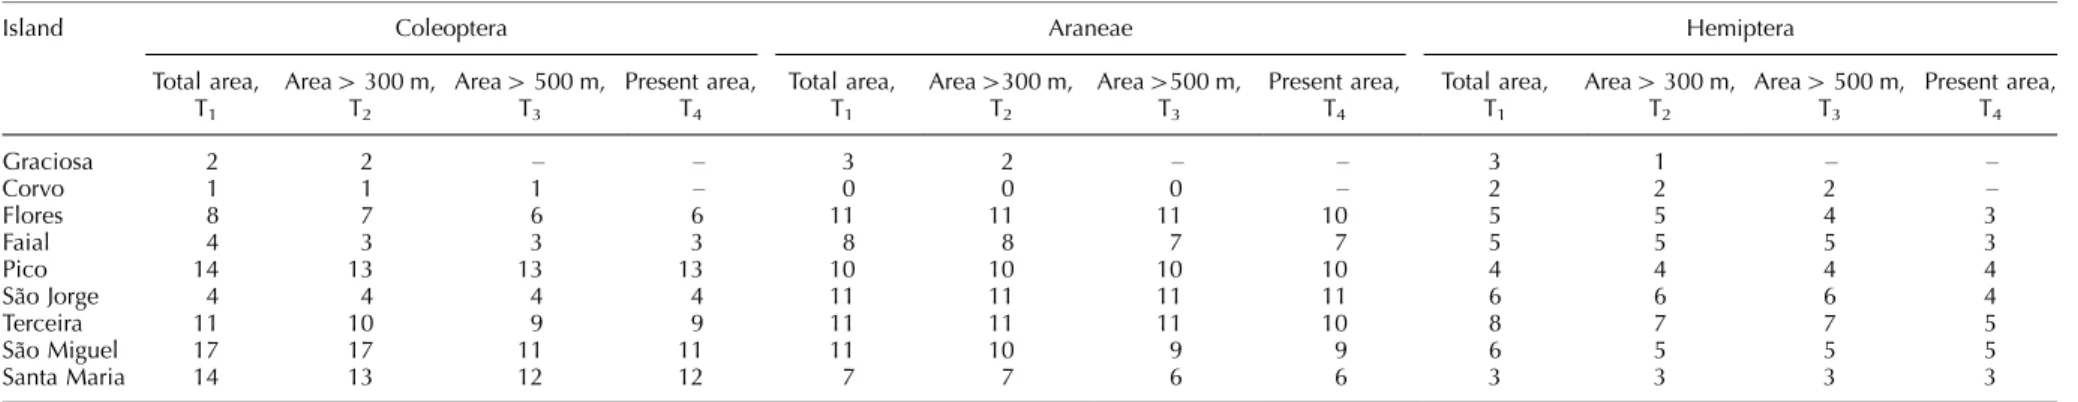 Table 1. Basic characteristics of the islands of the Azores (main source: Borges and Hortal 2009; see also Methods)